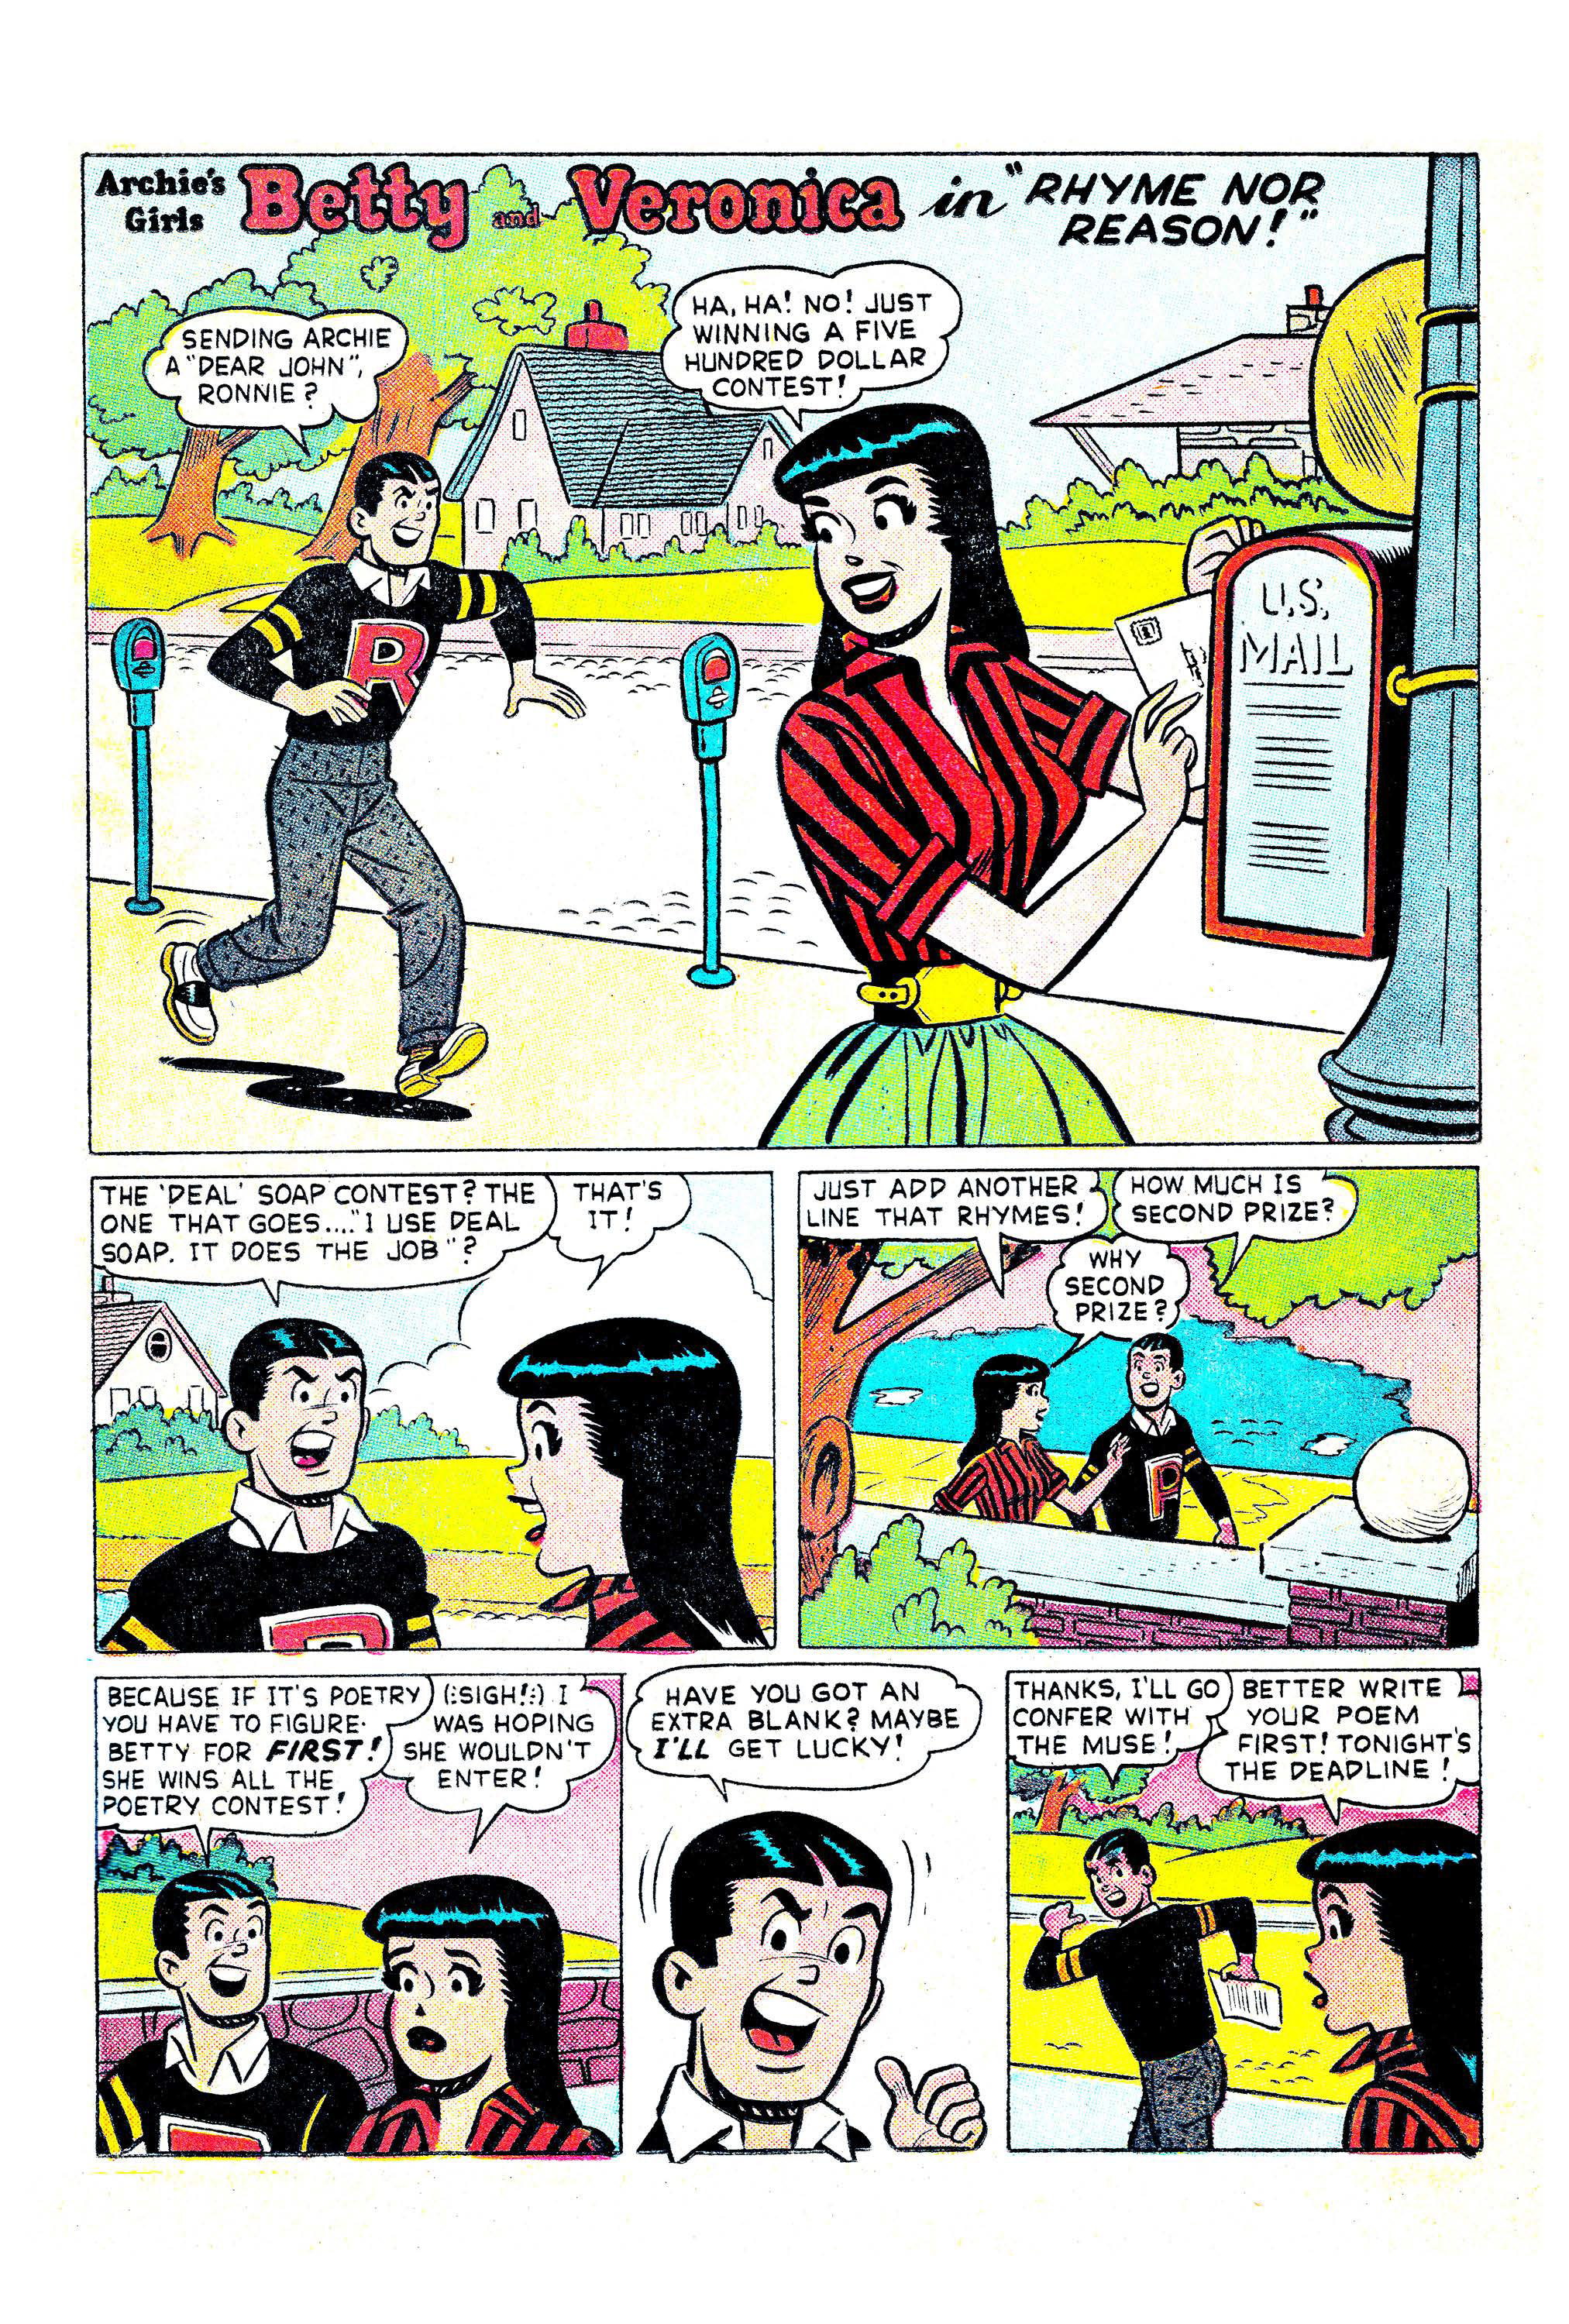 Read online Archie's Girls Betty and Veronica comic -  Issue #27 - 11